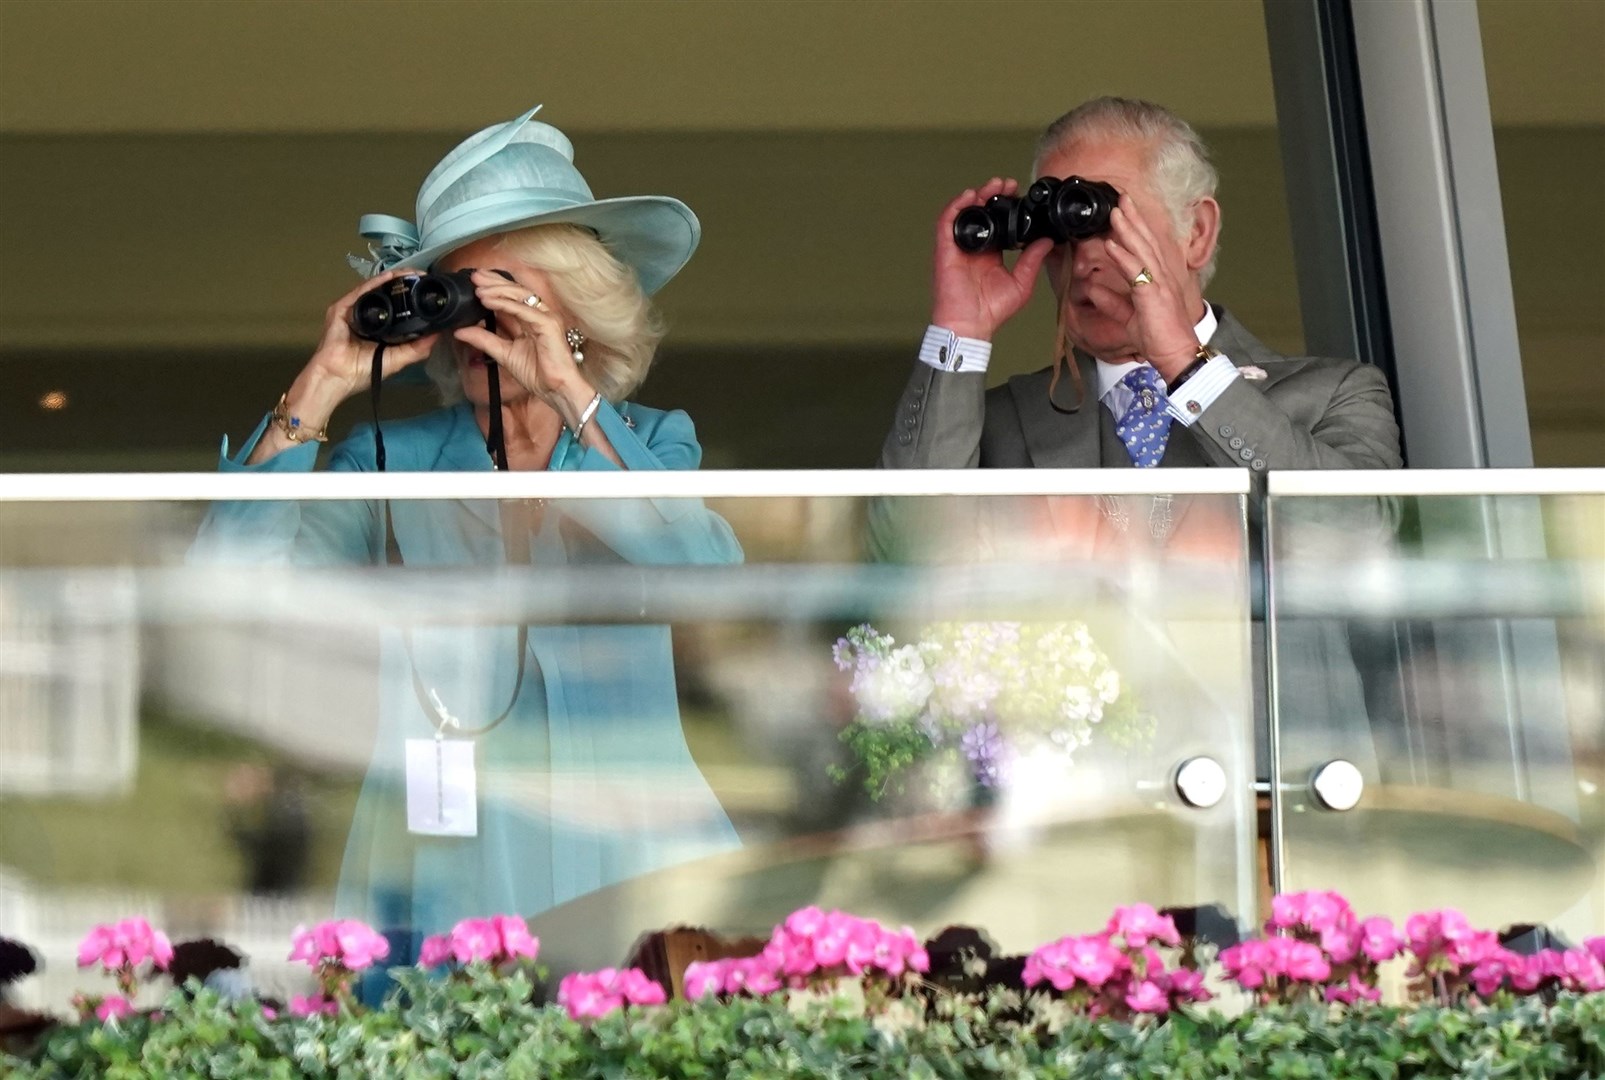 John Warren say the King and Queen Consort have ‘taken such an interest’ as owners (Aaron Chown/PA)